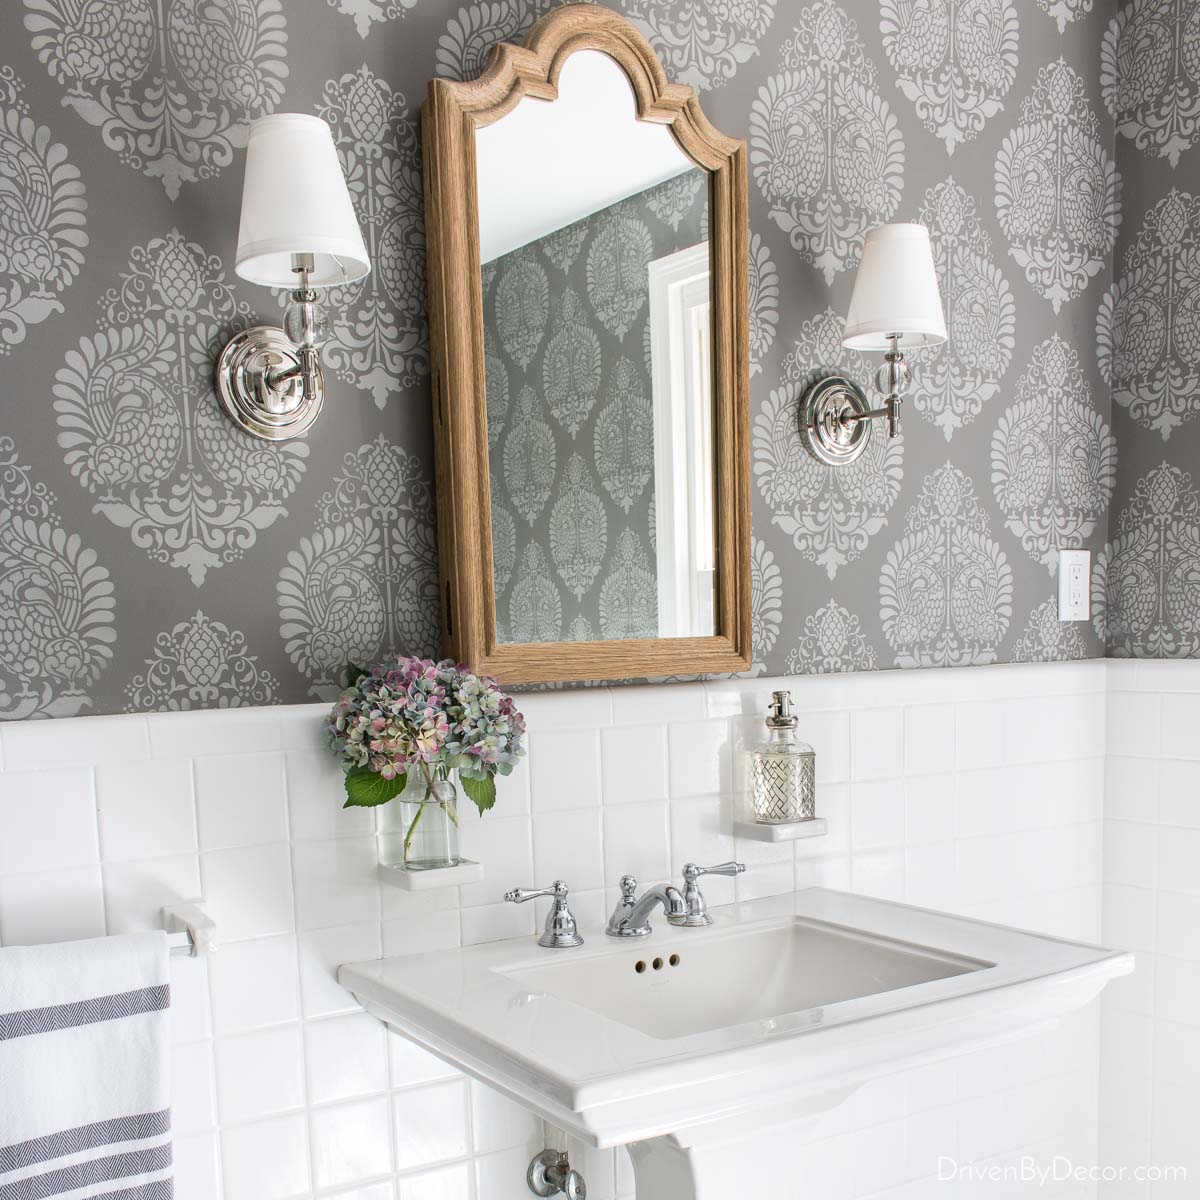 Guest Bathroom Paint Makeover